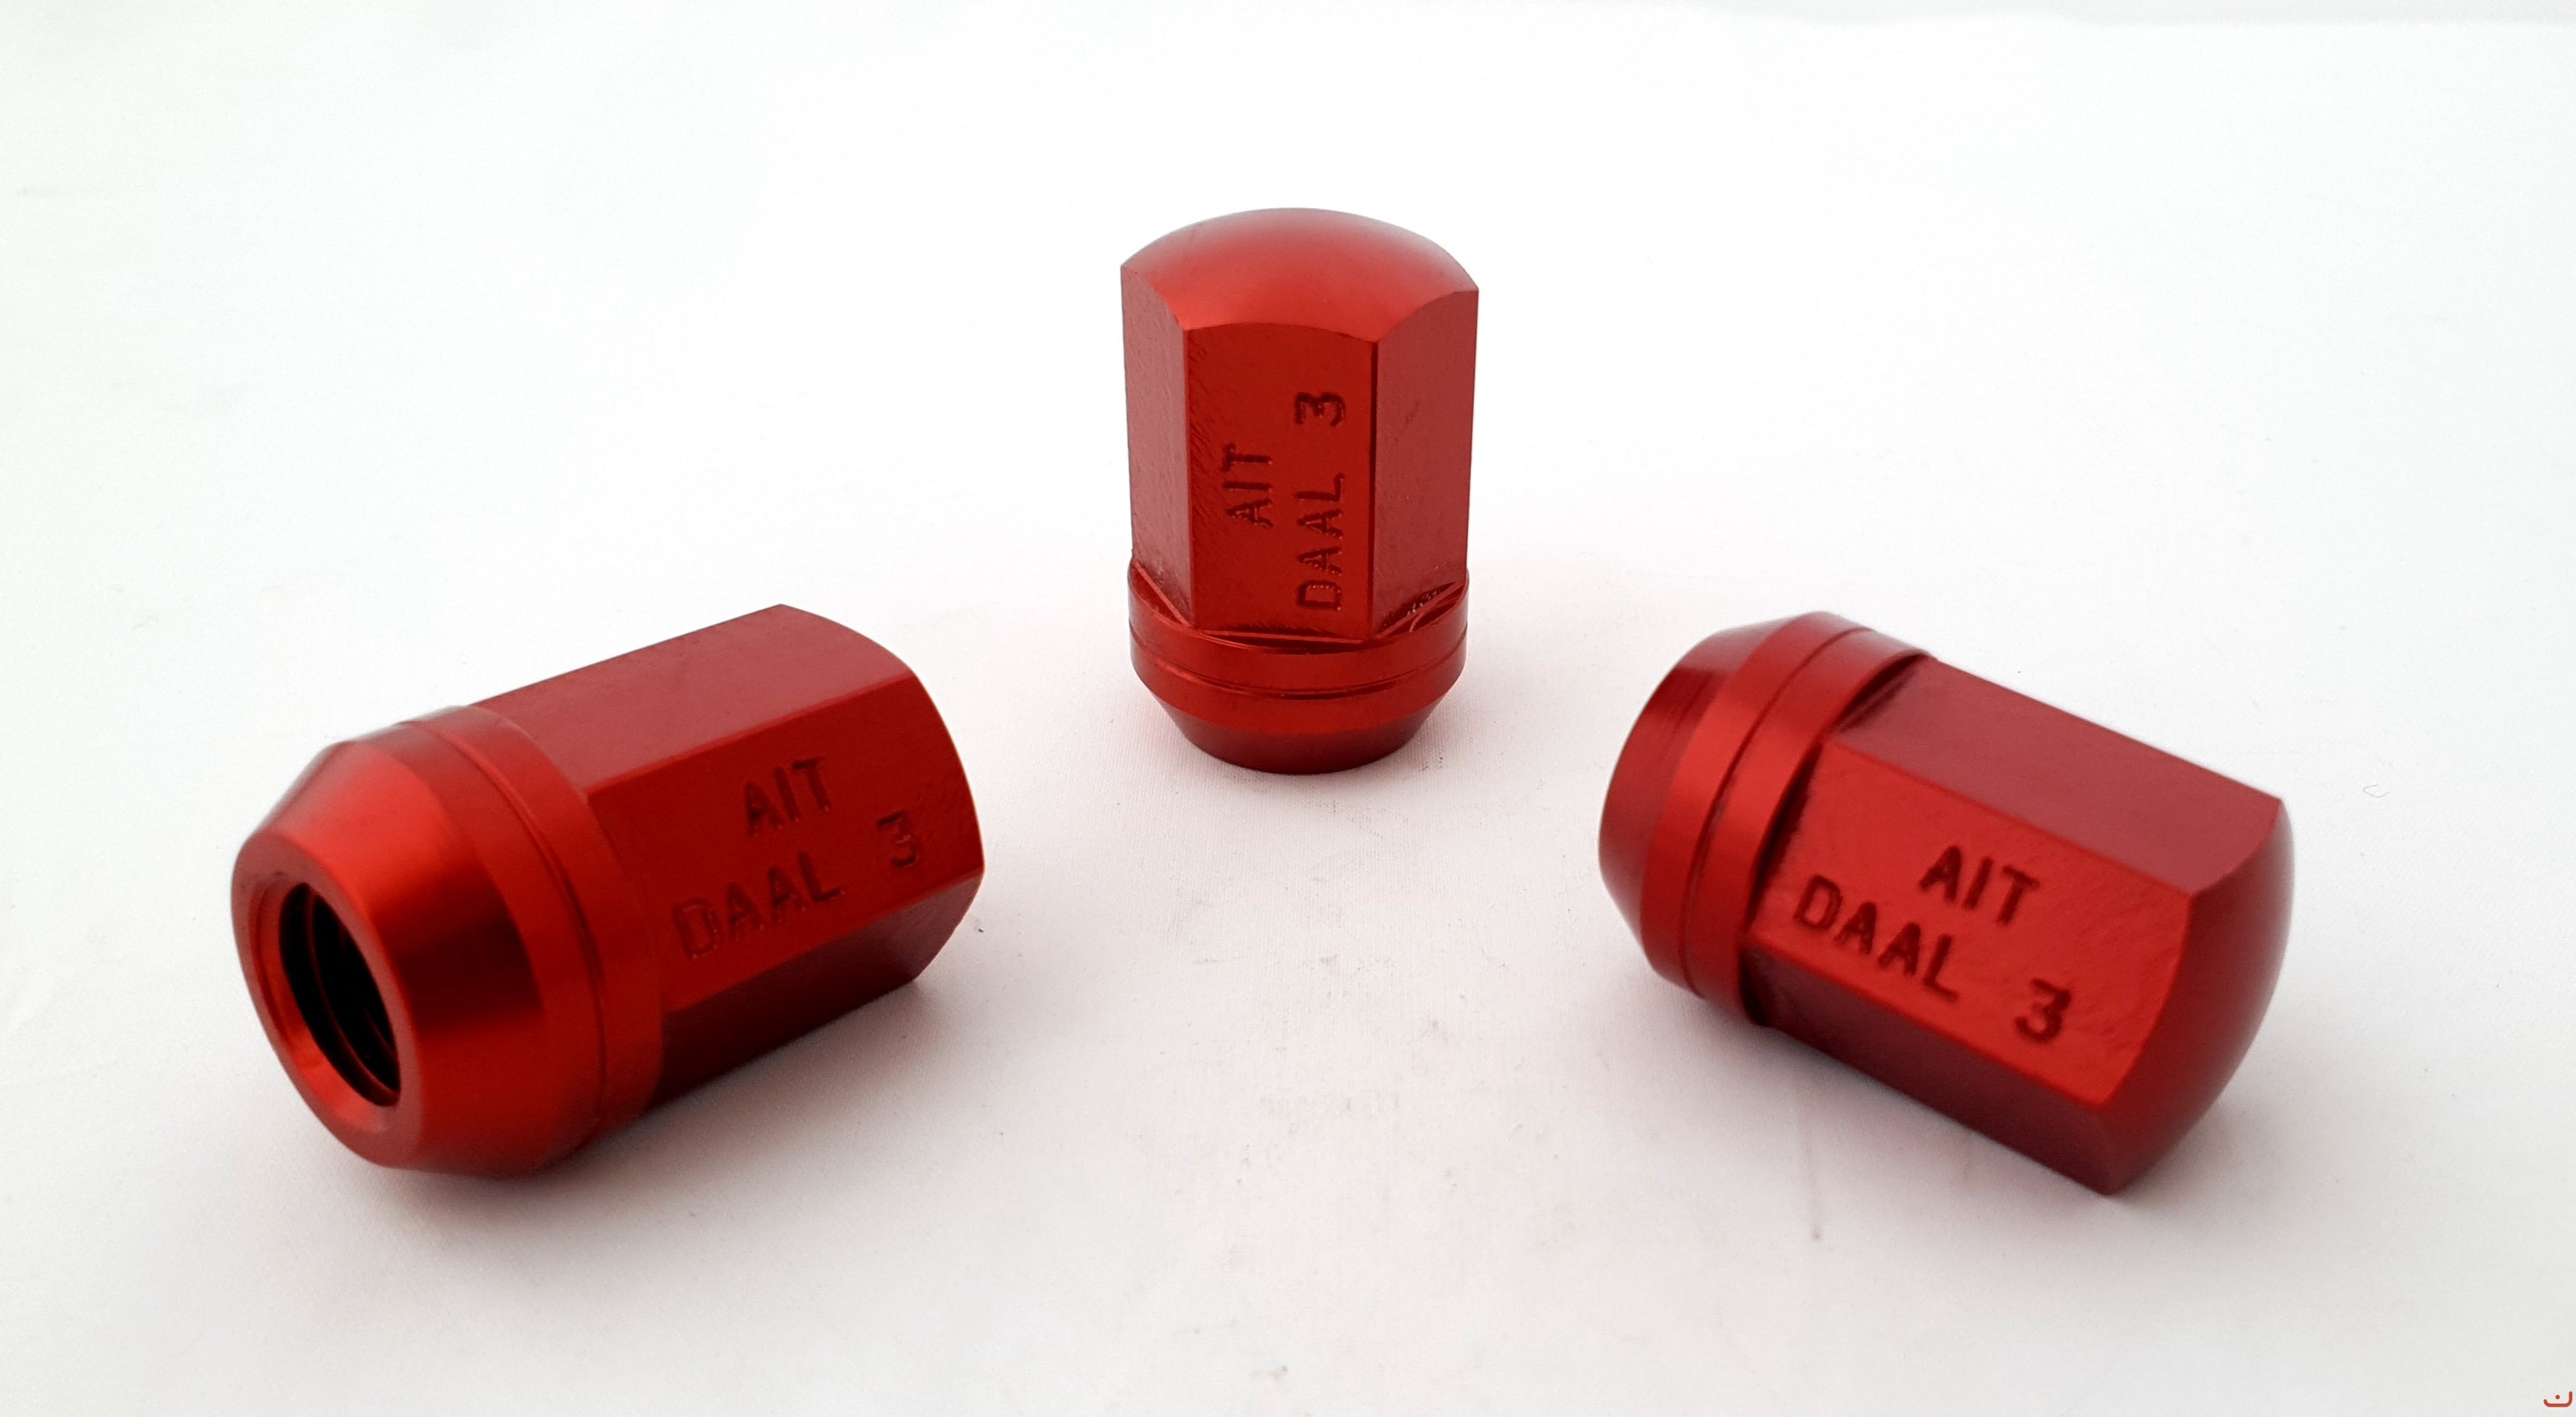 AITECH AIT-DAAL3 Гайка 12x1,5 ex 19mm, od 22mm conical SEAT, total lenght 27mm Ergal alloy blank nut (red or blue) Photo-1 